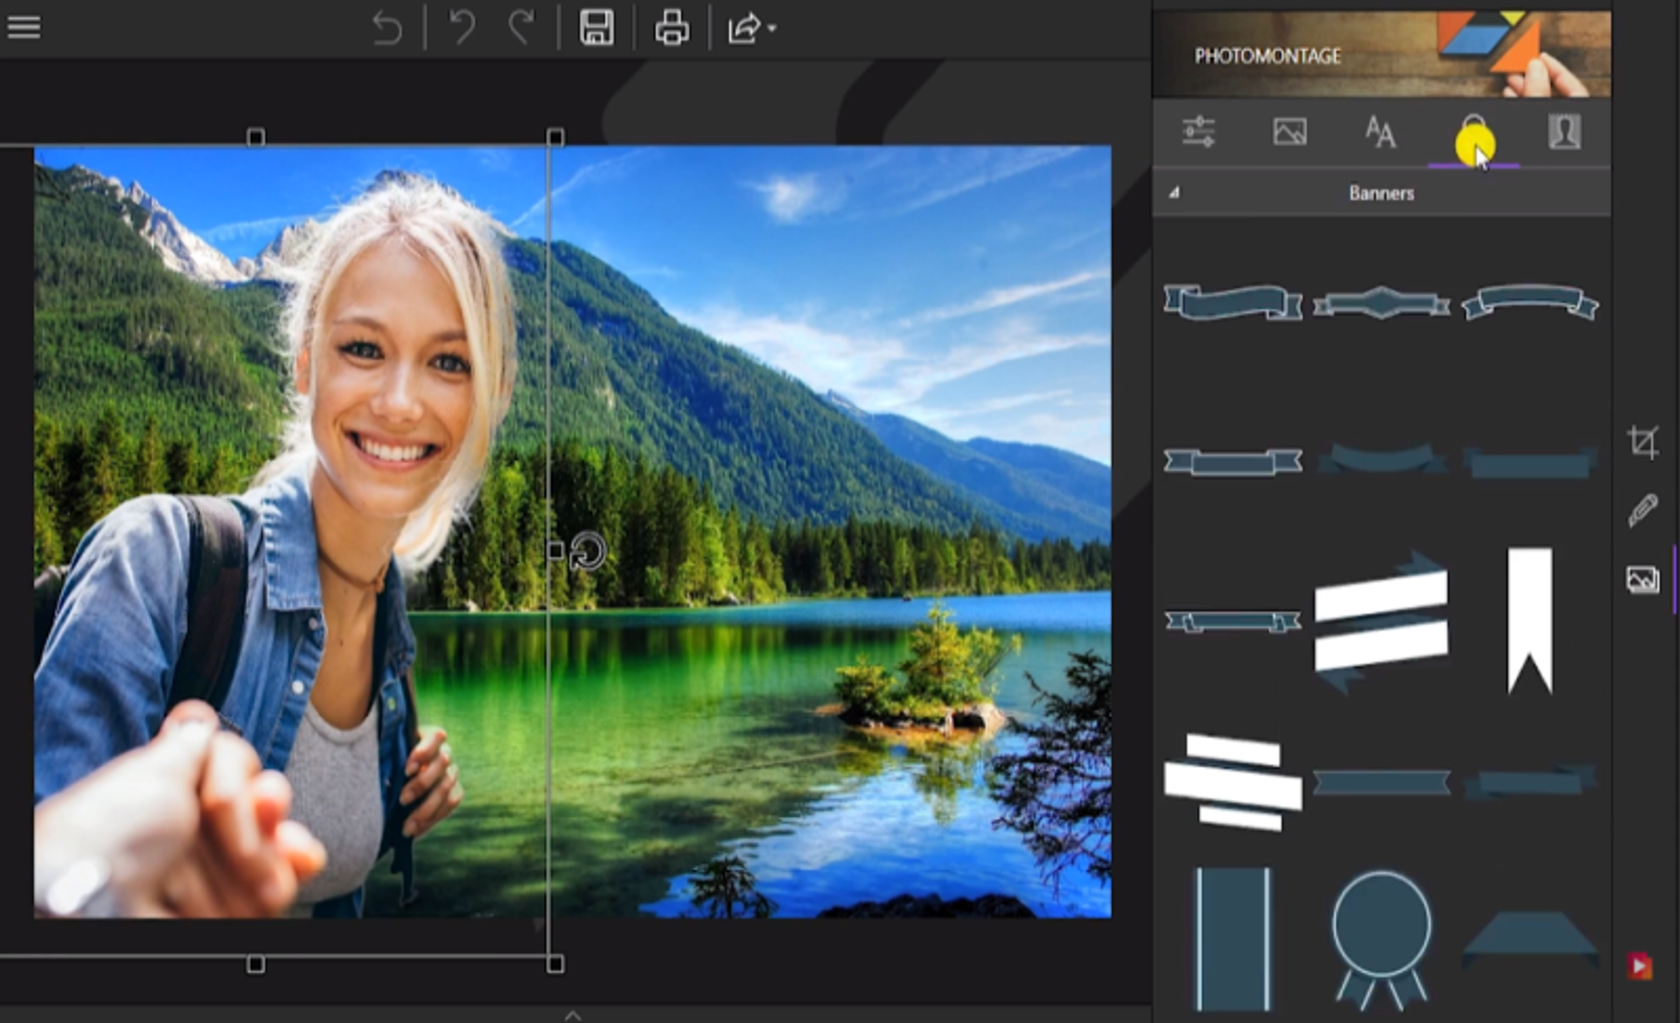 alter image software free download